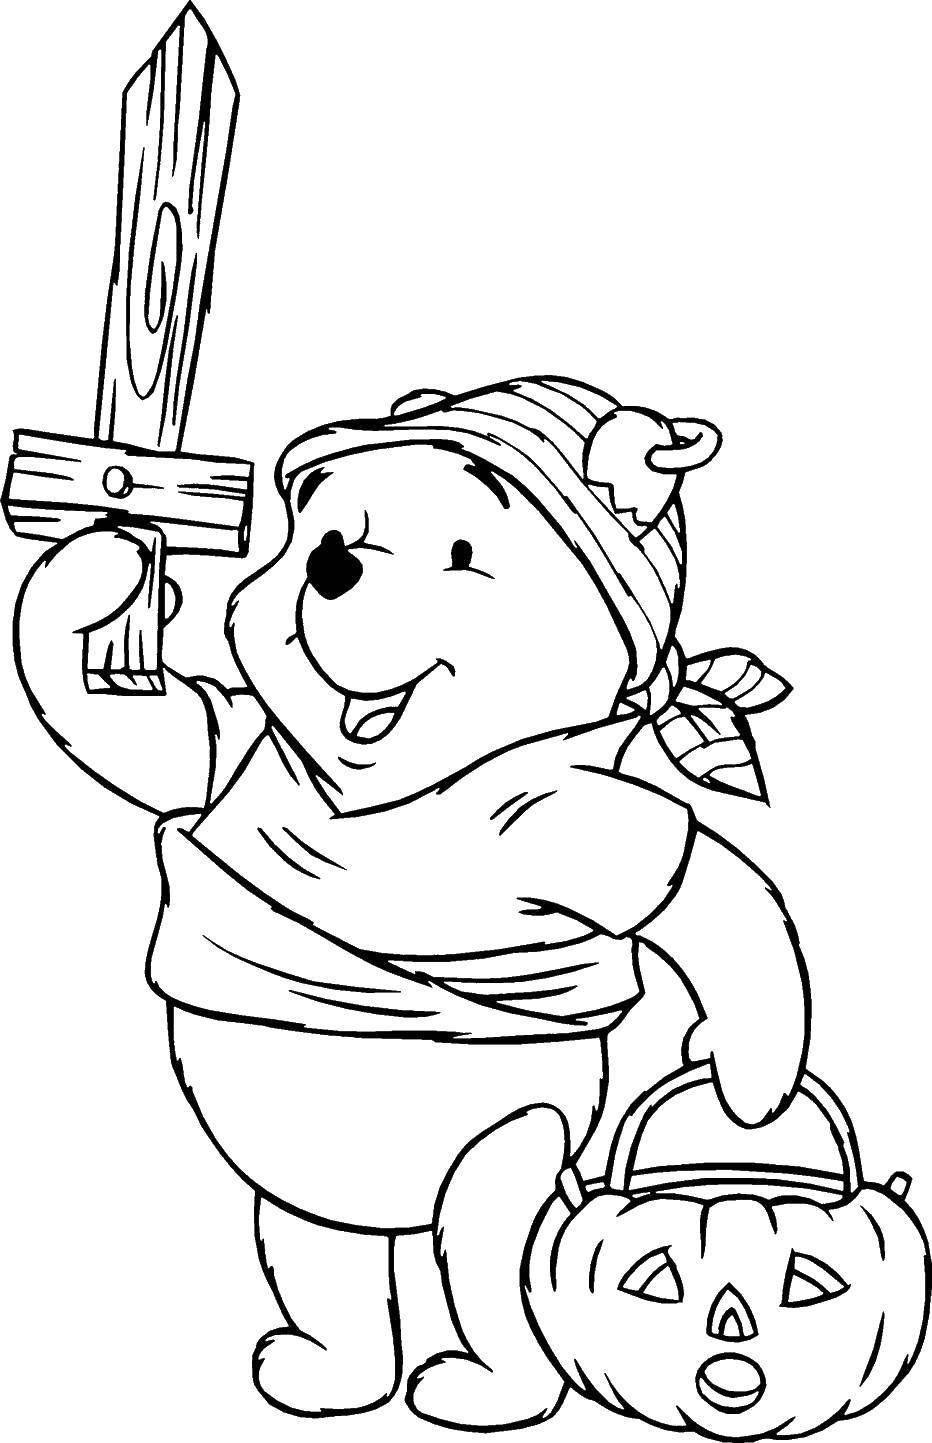 Coloring Winnie the Pooh. Category cartoons. Tags:  cartoons, Winnie the Pooh, pumpkin.